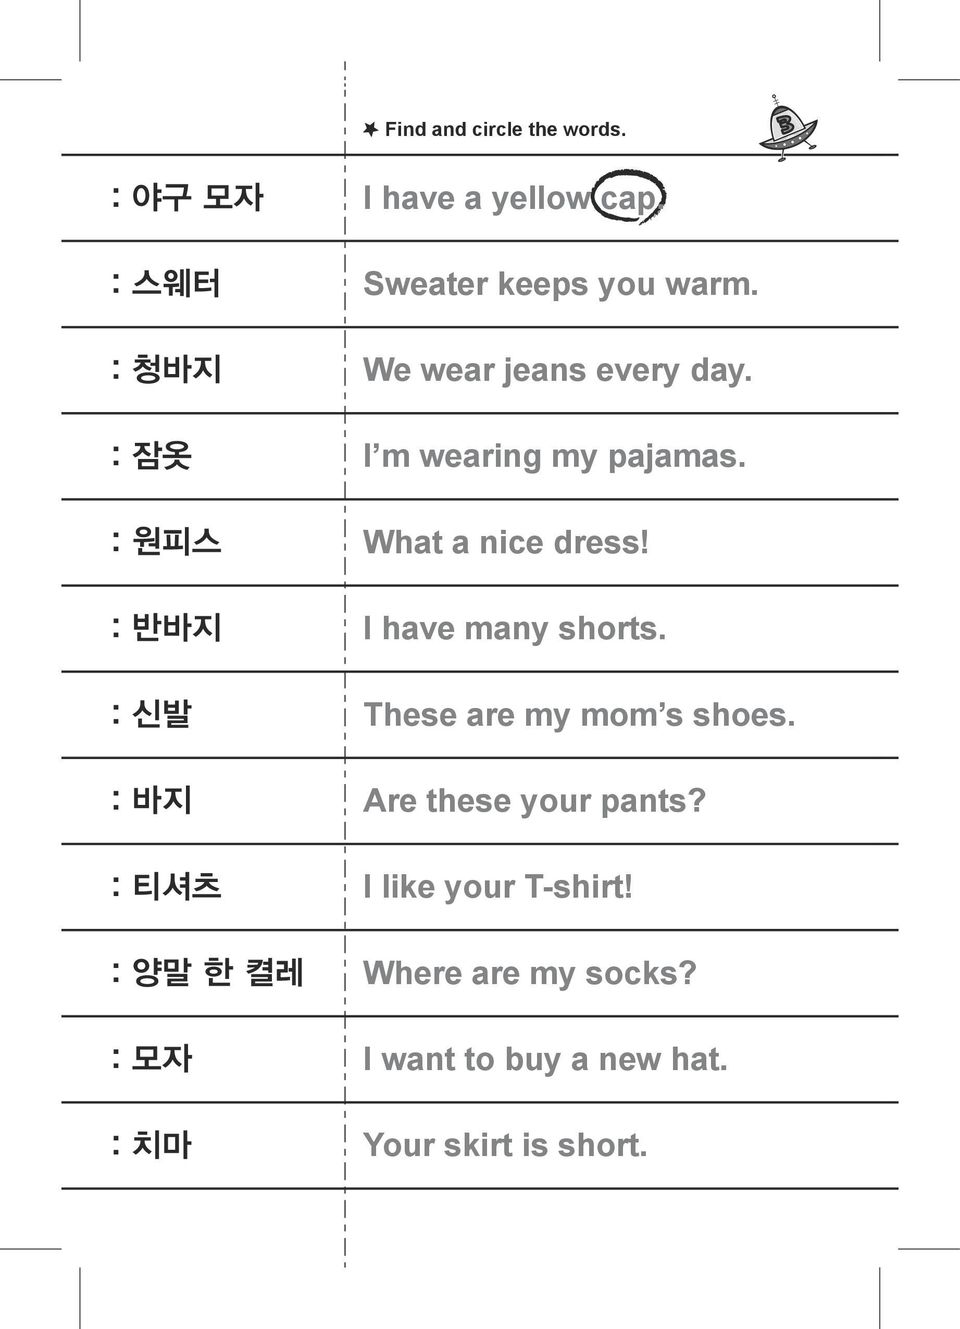 cap. Sweater keeps you warm. We wear jeans every day. I m wearing my pajamas.